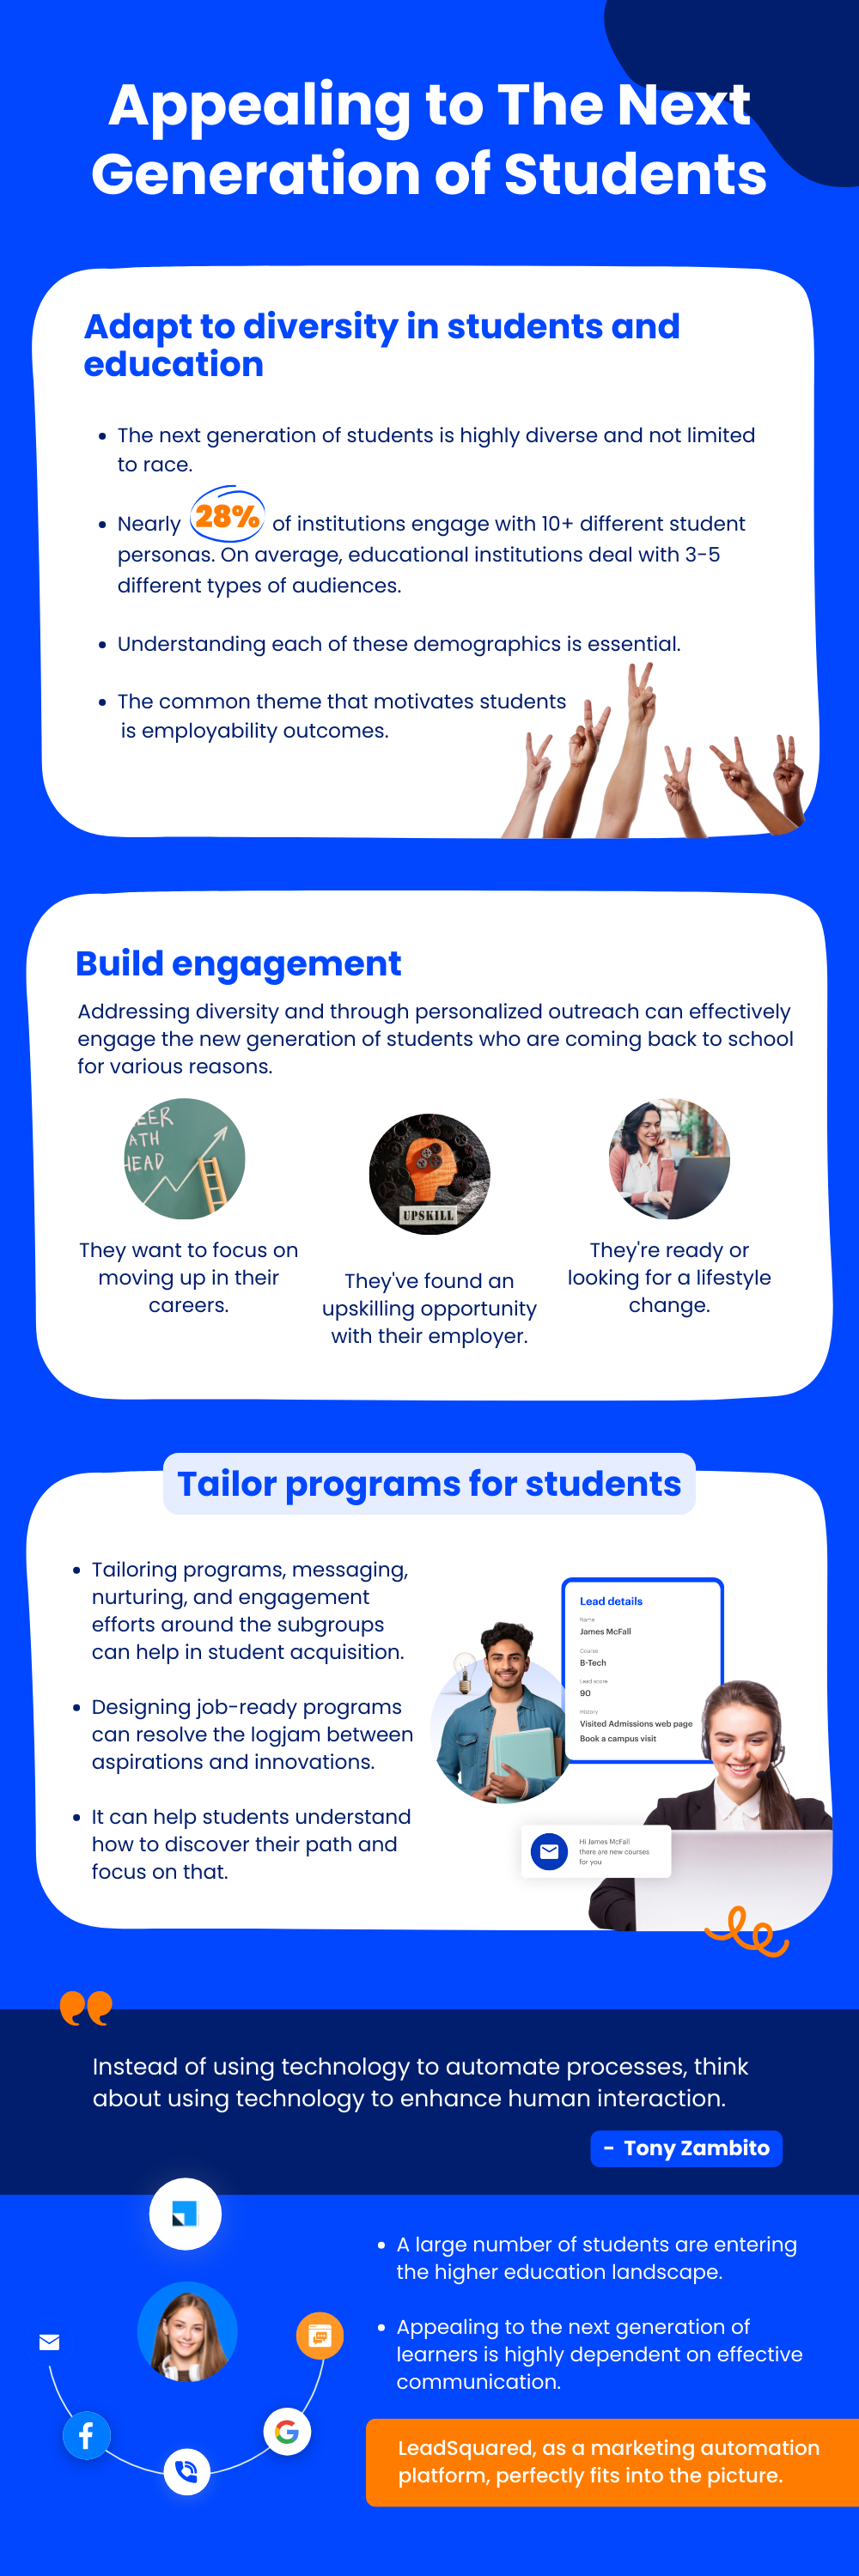 Appealing to the next generation of students infographic